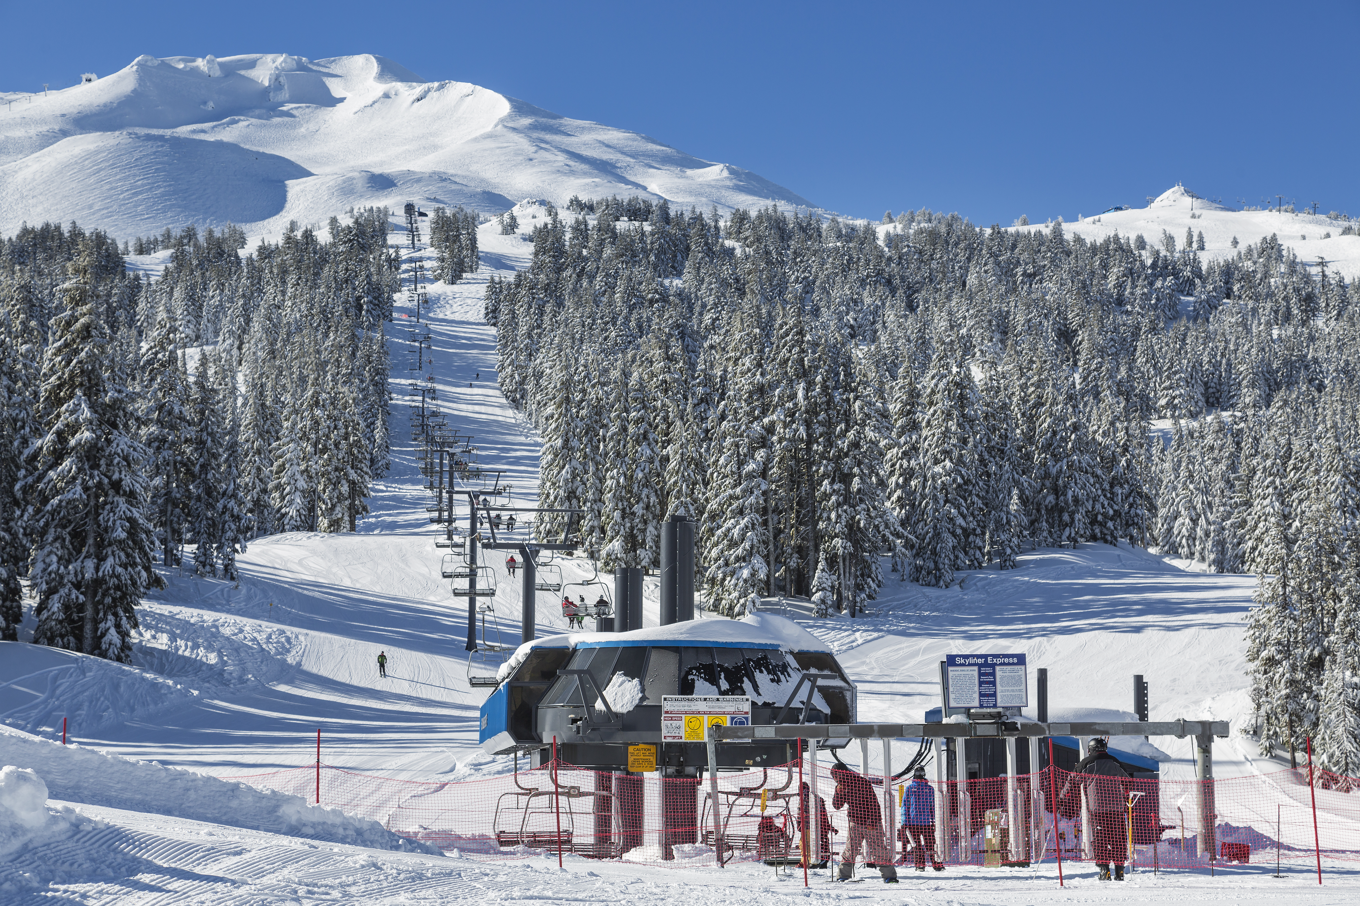 Mt. Bachelor for groups Photo courtesy of Shutterstock